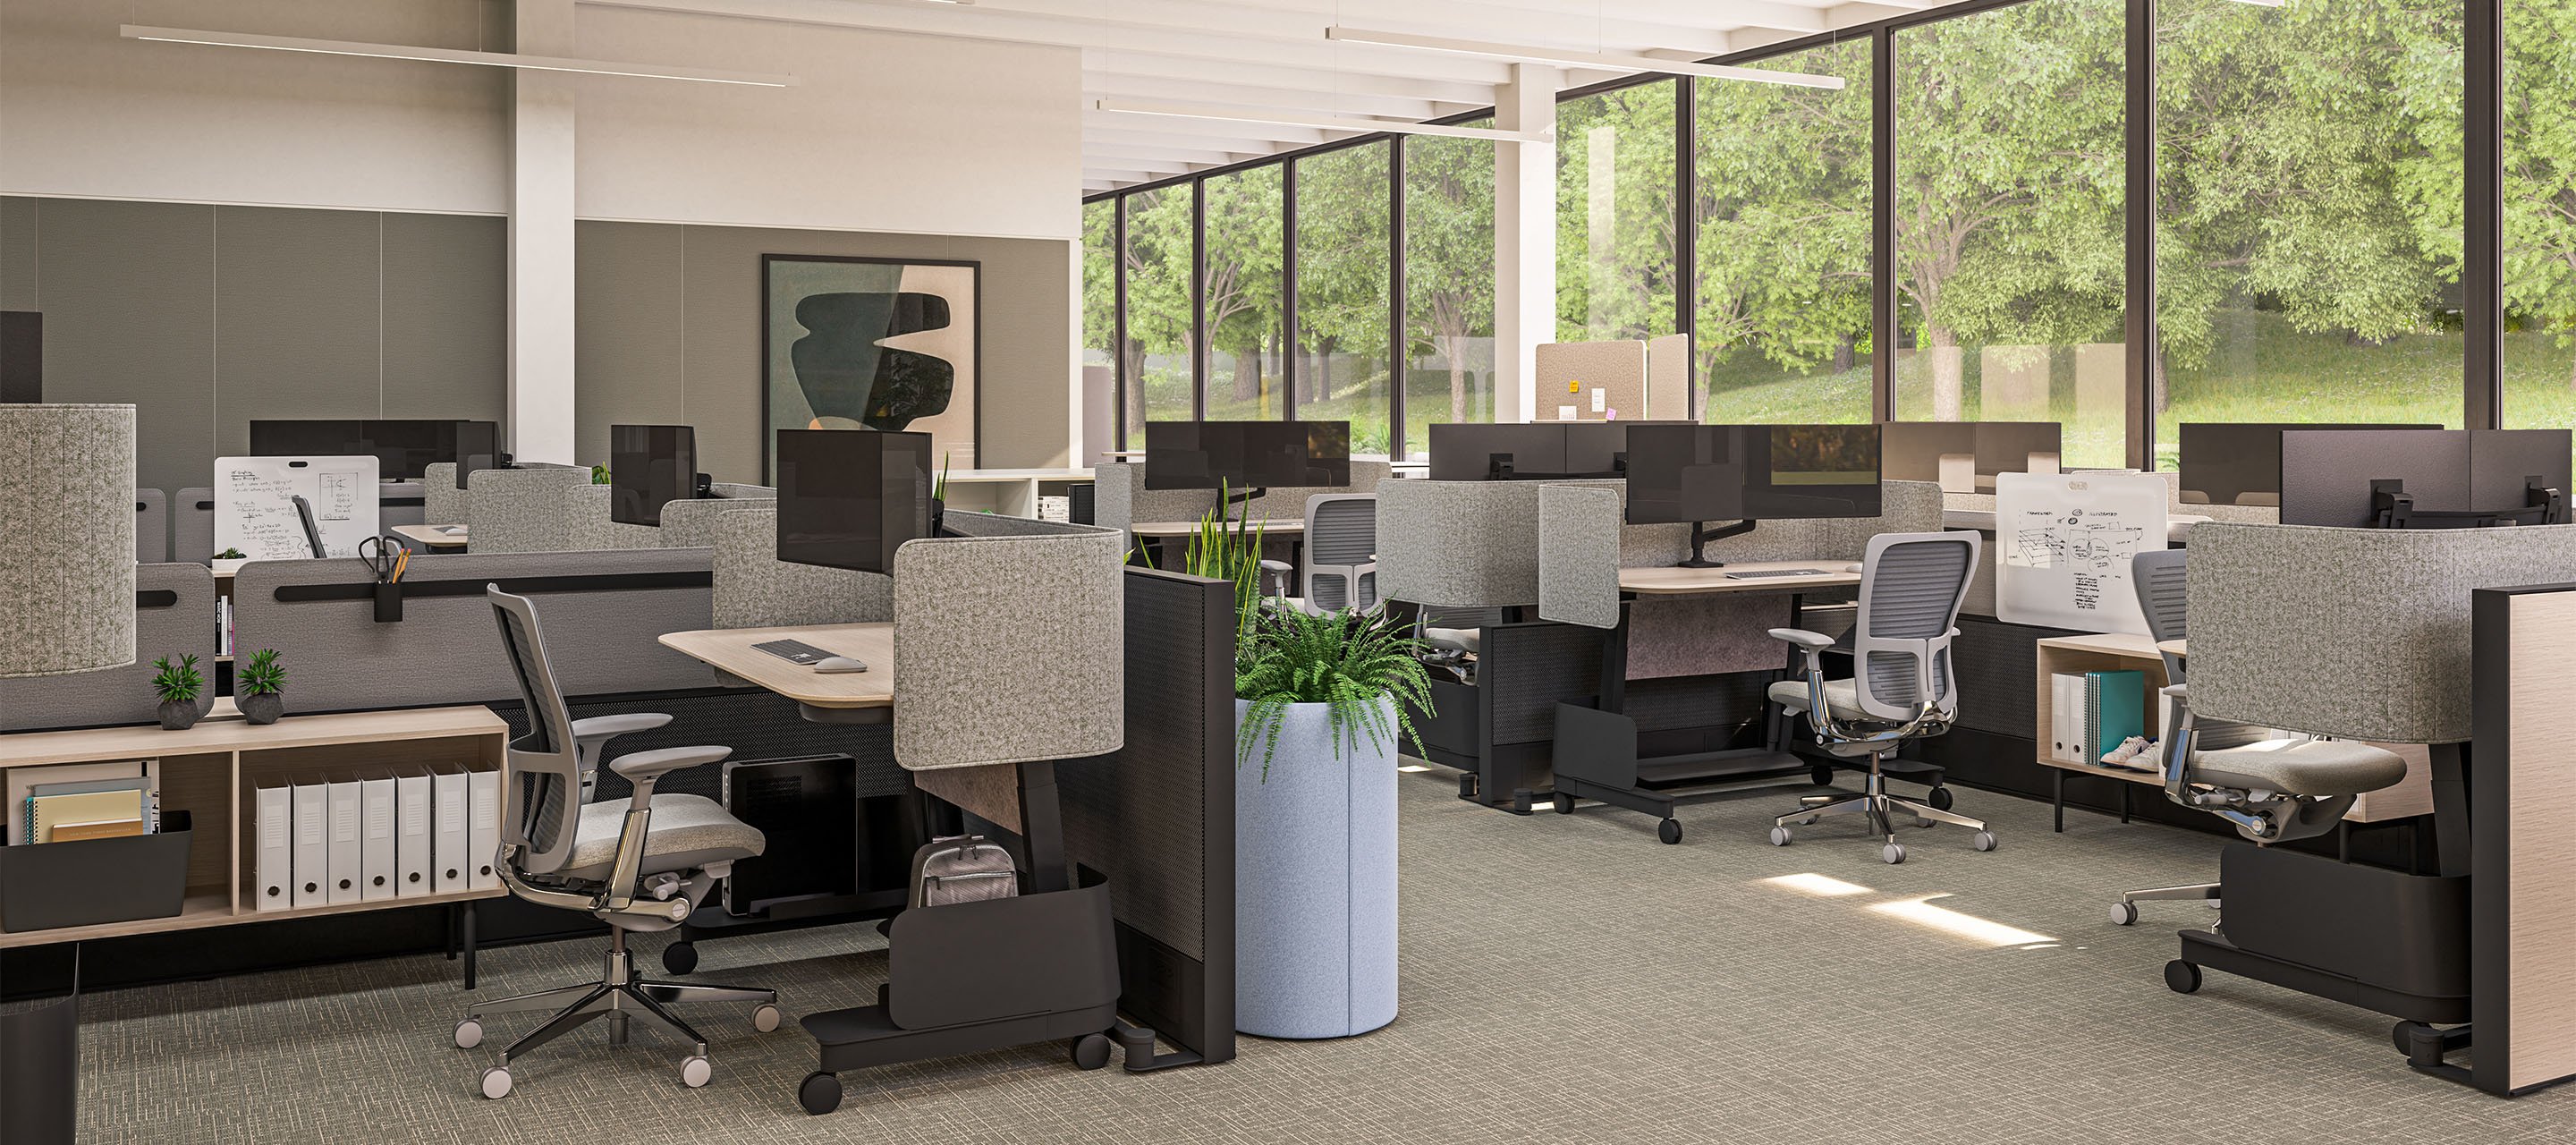 Haworth Compose Echo workspaces in a office space view 1/